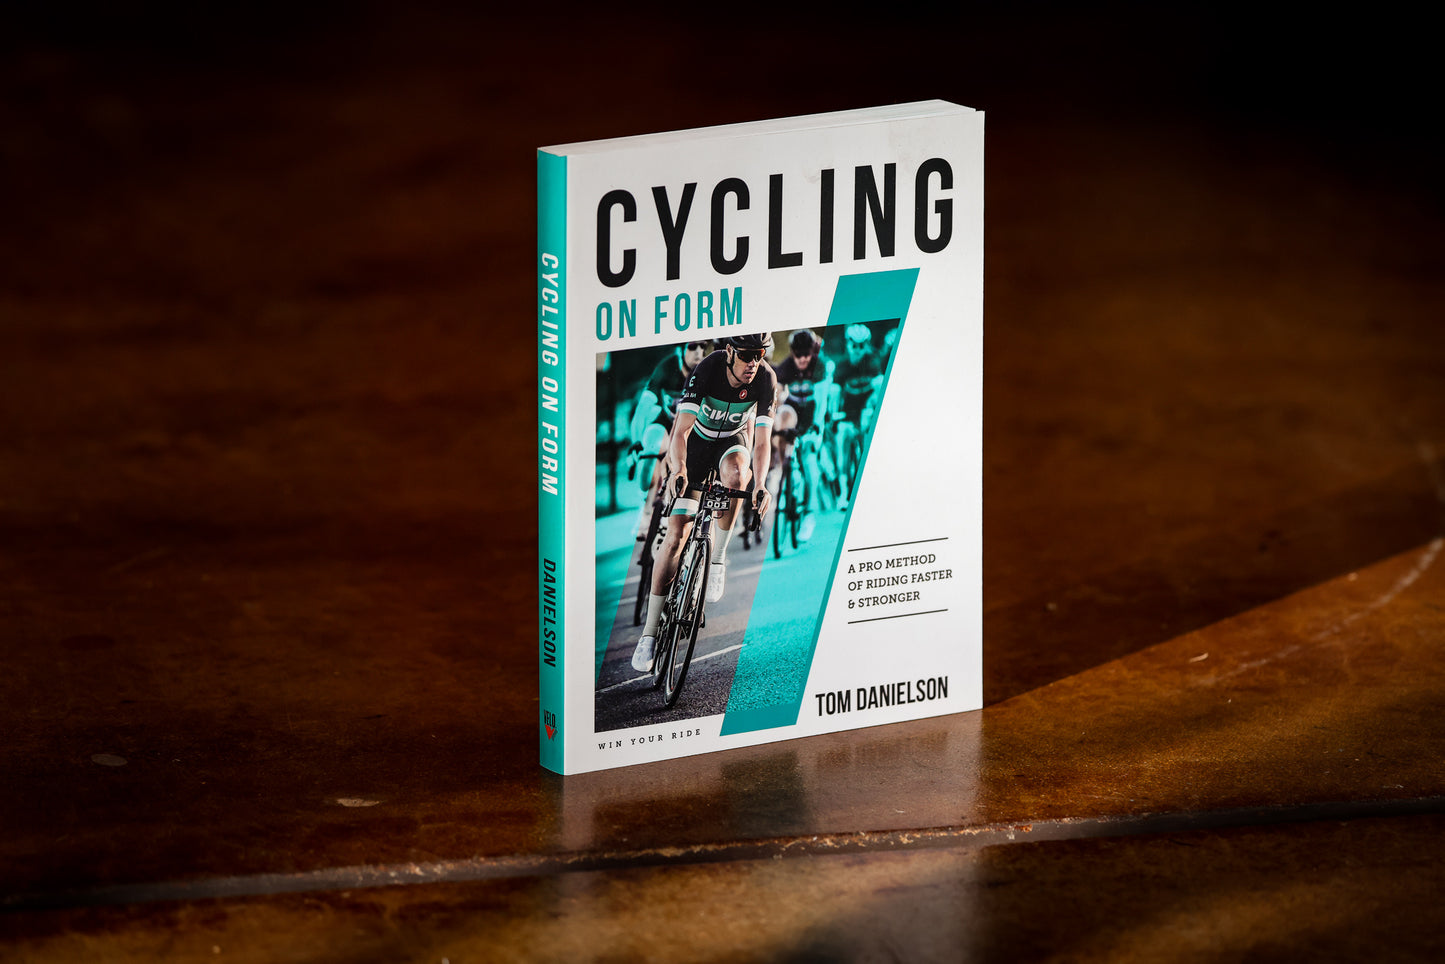 CYCLING ON FORM BOOK